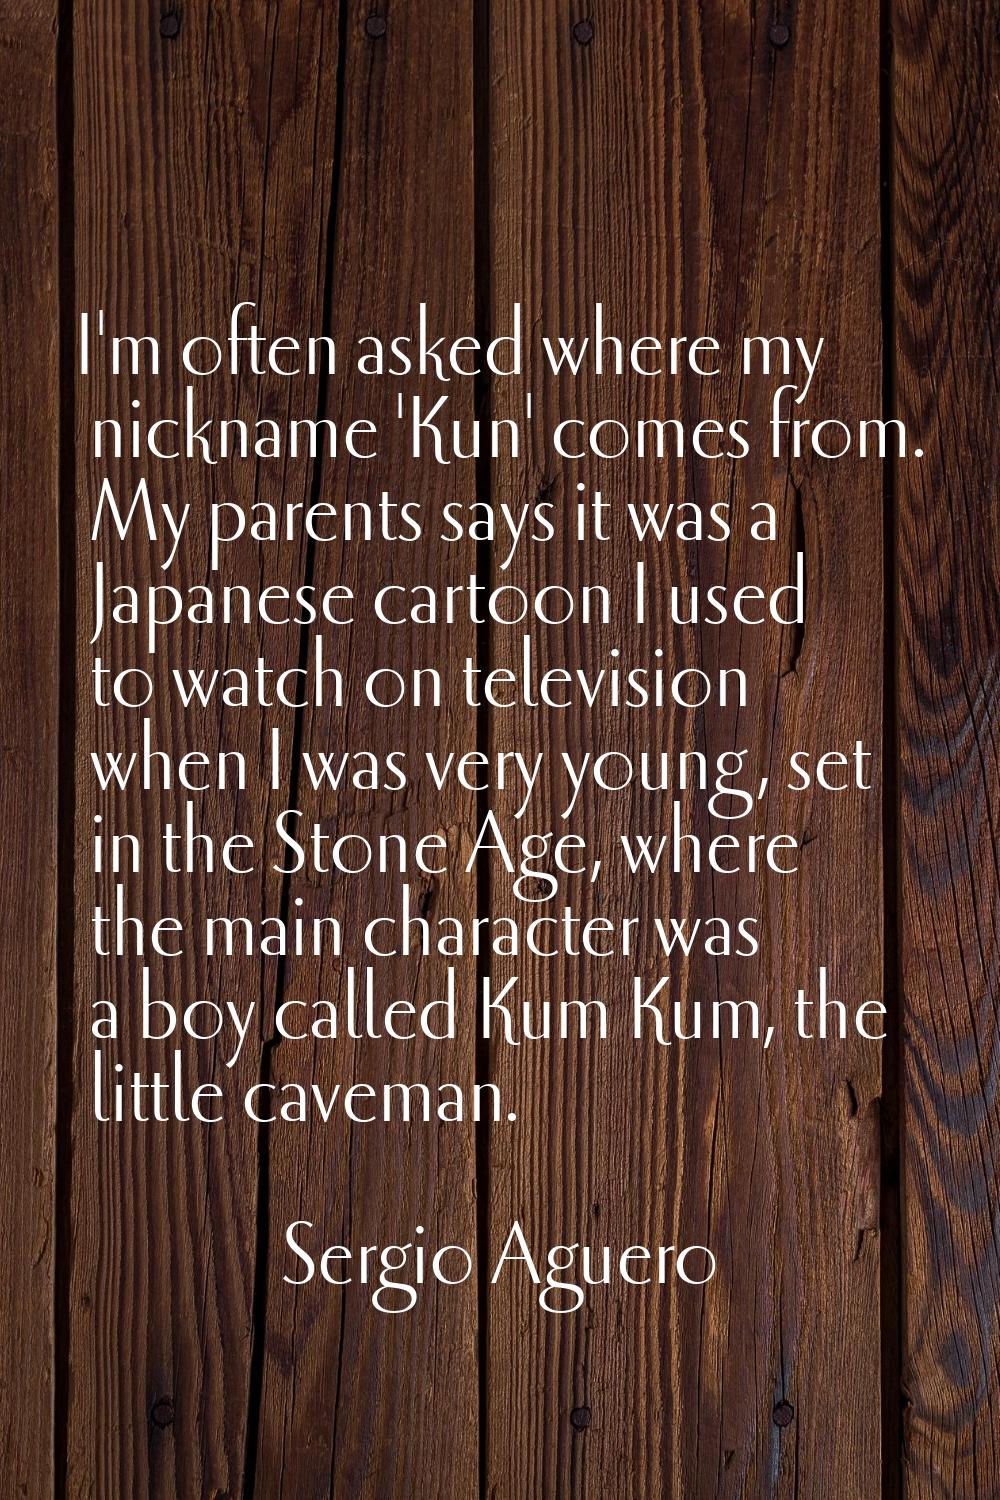 I'm often asked where my nickname 'Kun' comes from. My parents says it was a Japanese cartoon I use